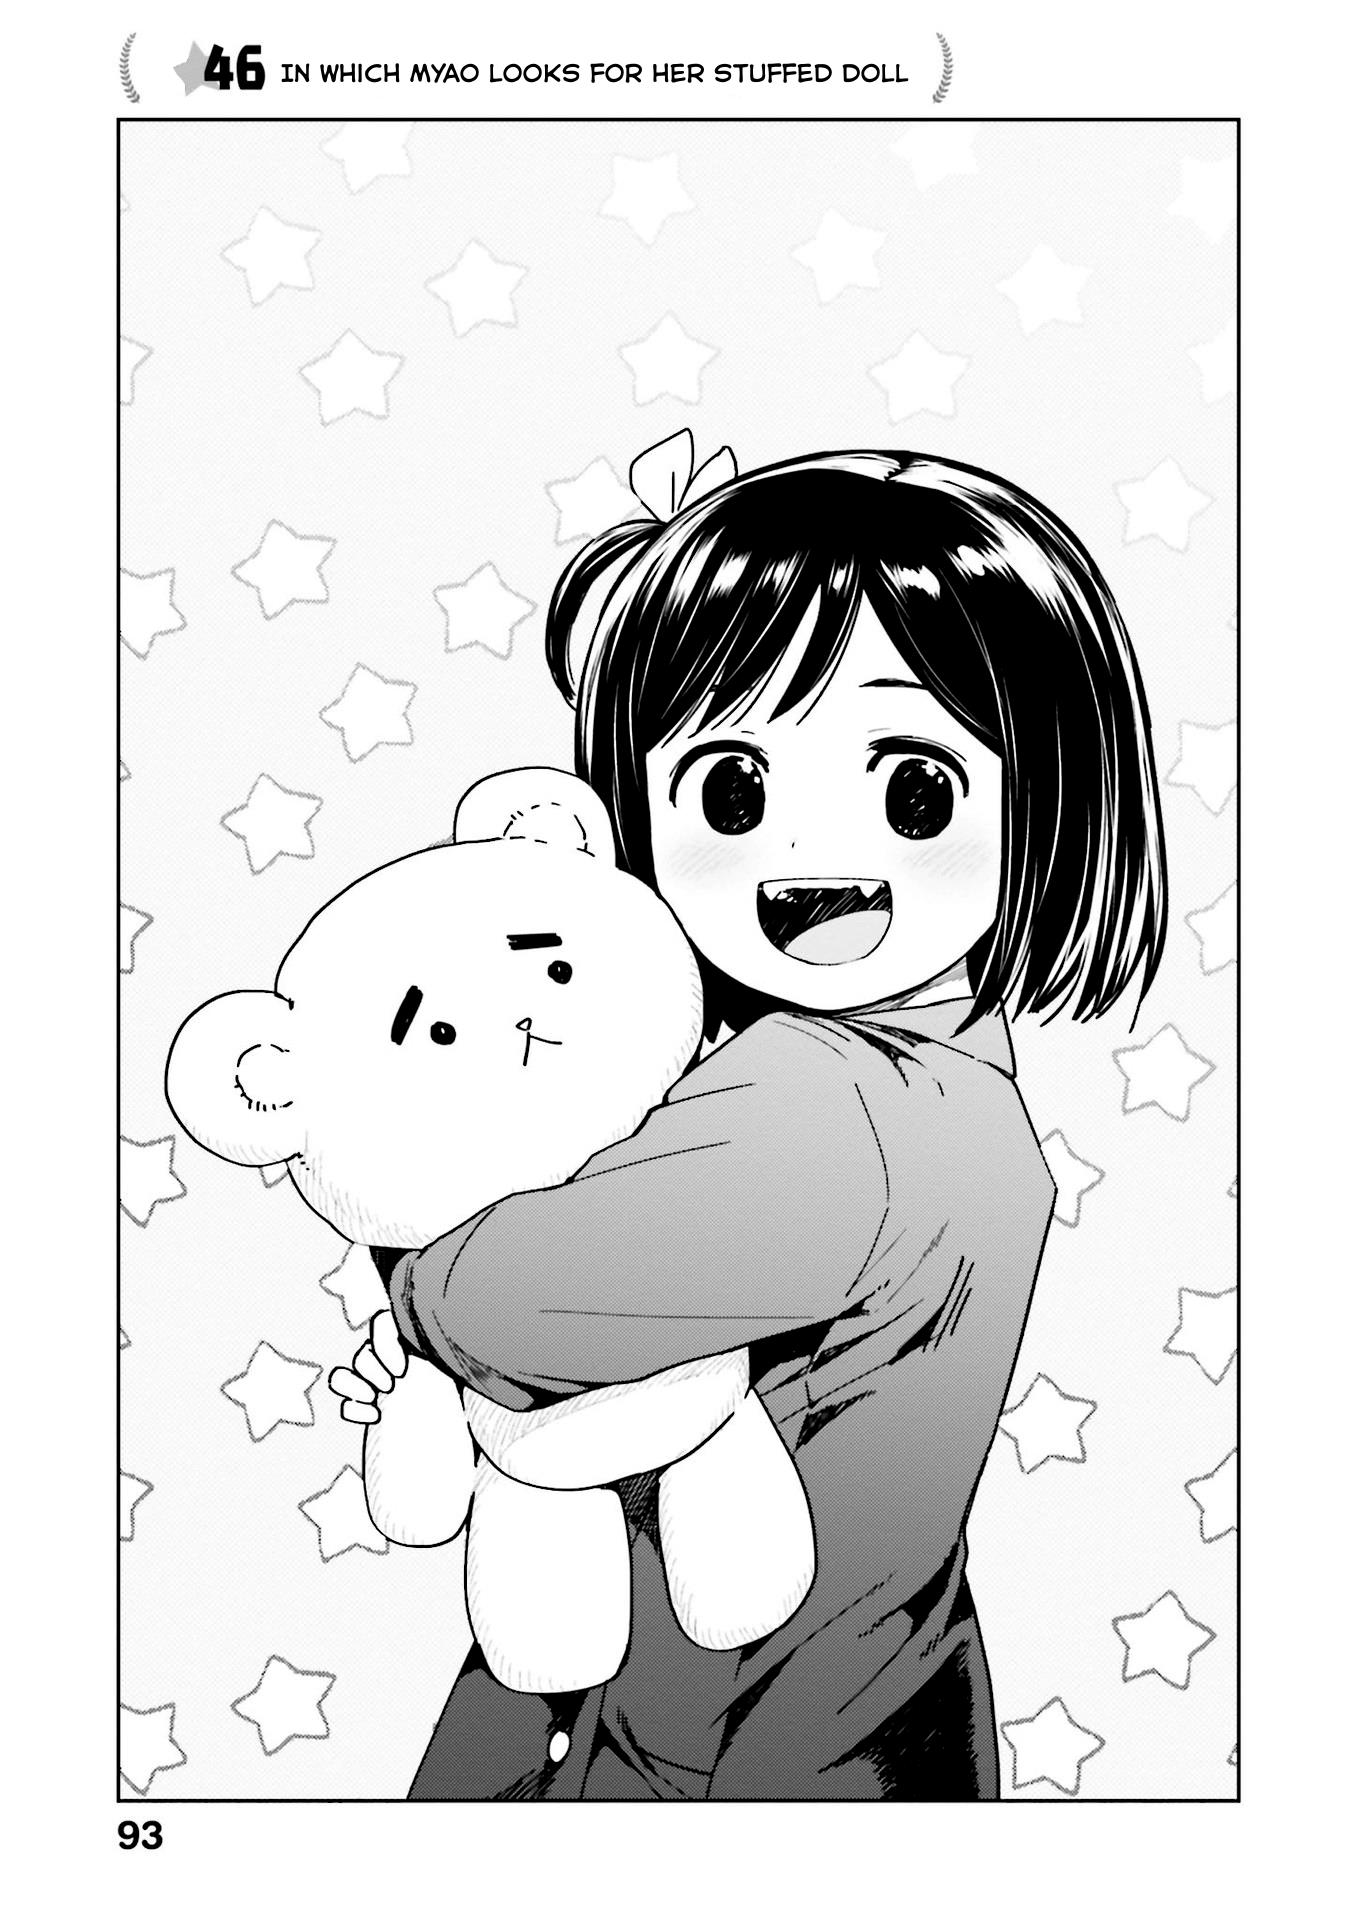 Oh, Our General Myao Vol.4 Chapter 46: In Which Myao Looks For Her Stuffed Doll - Picture 1